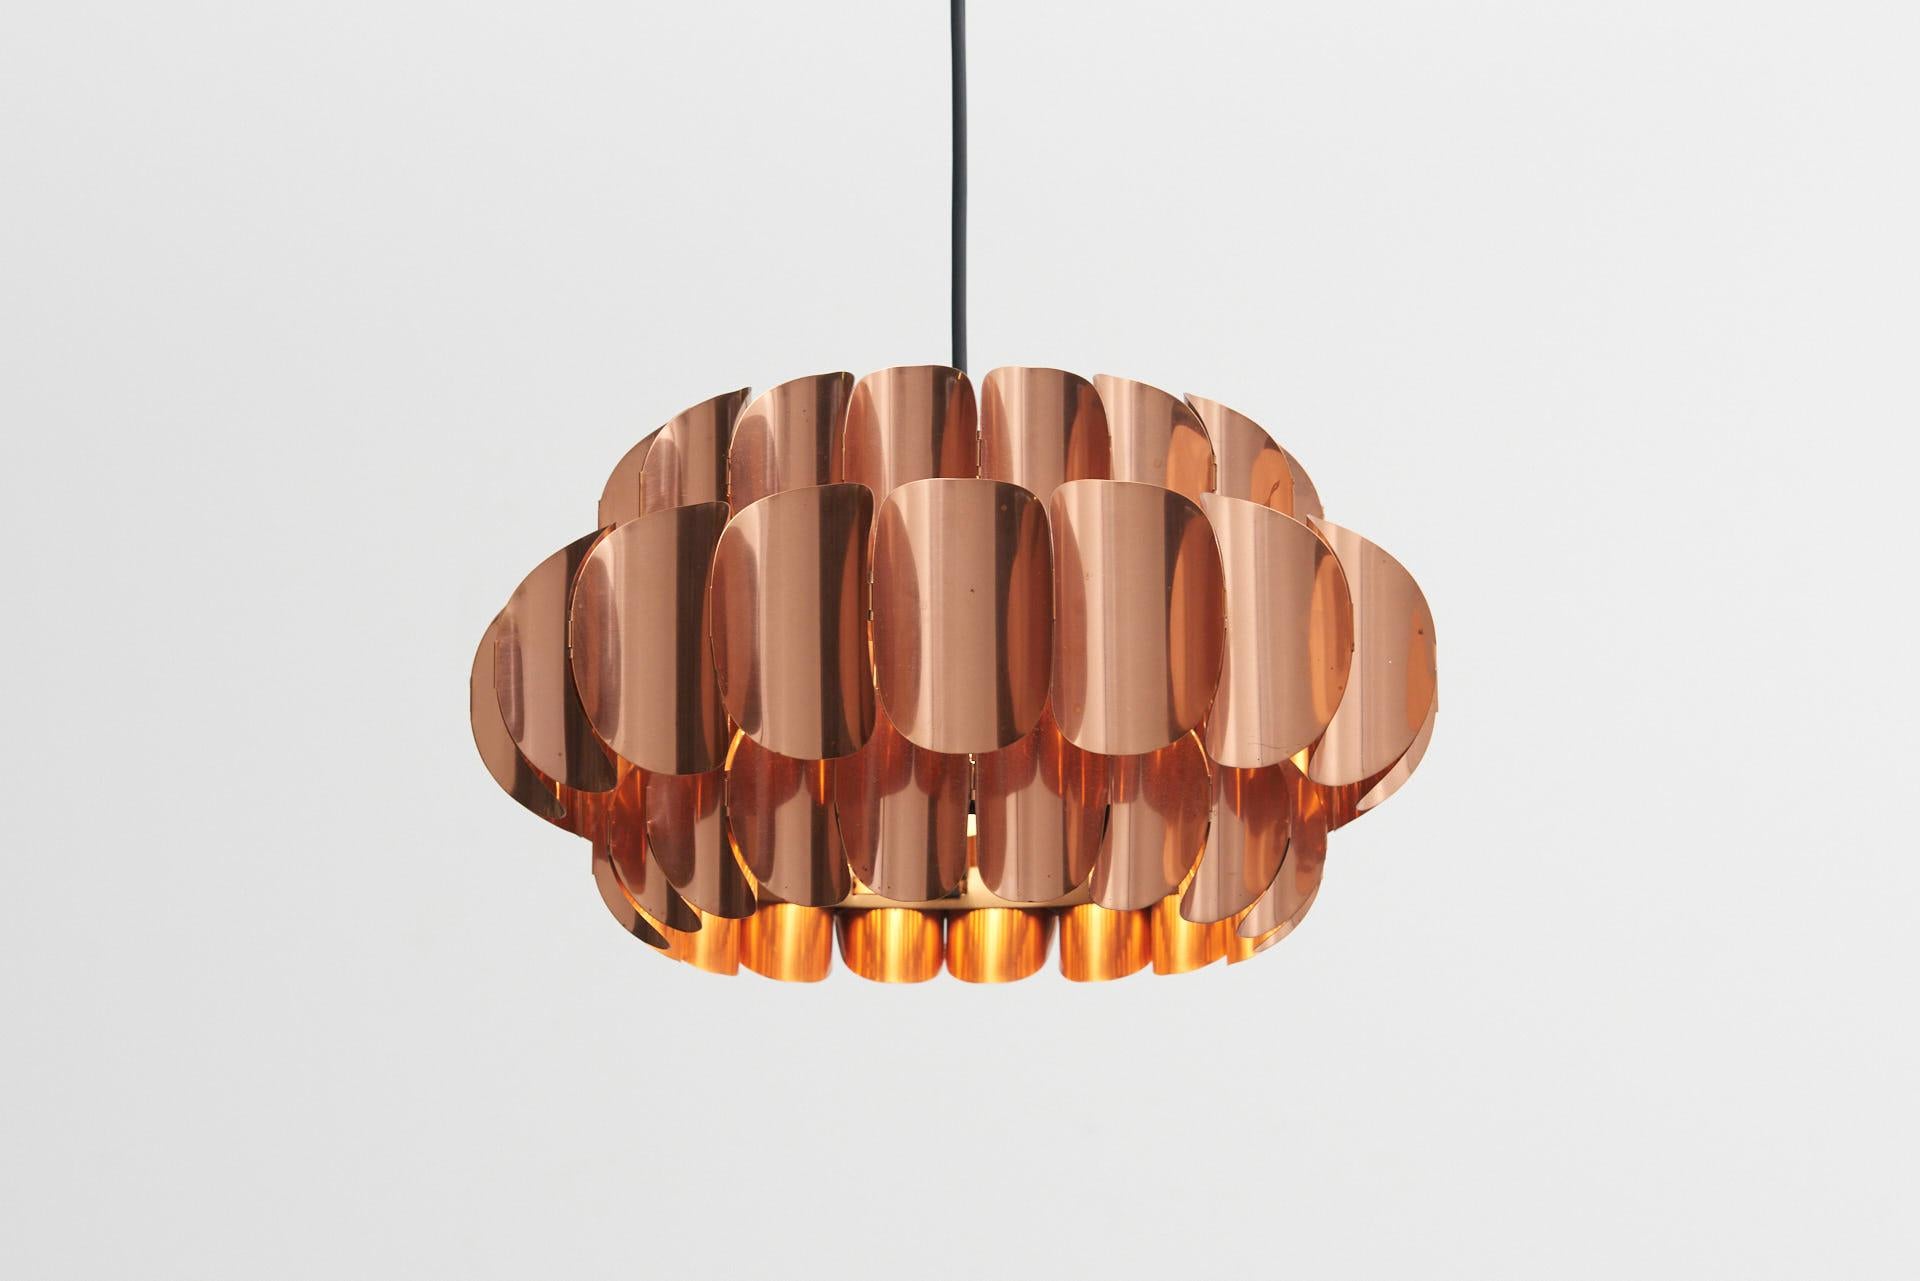 A red copper leaf suspension lamp, designed by Thorsten Orrling in the 1960s. Produced by Markaryd in Sweden.